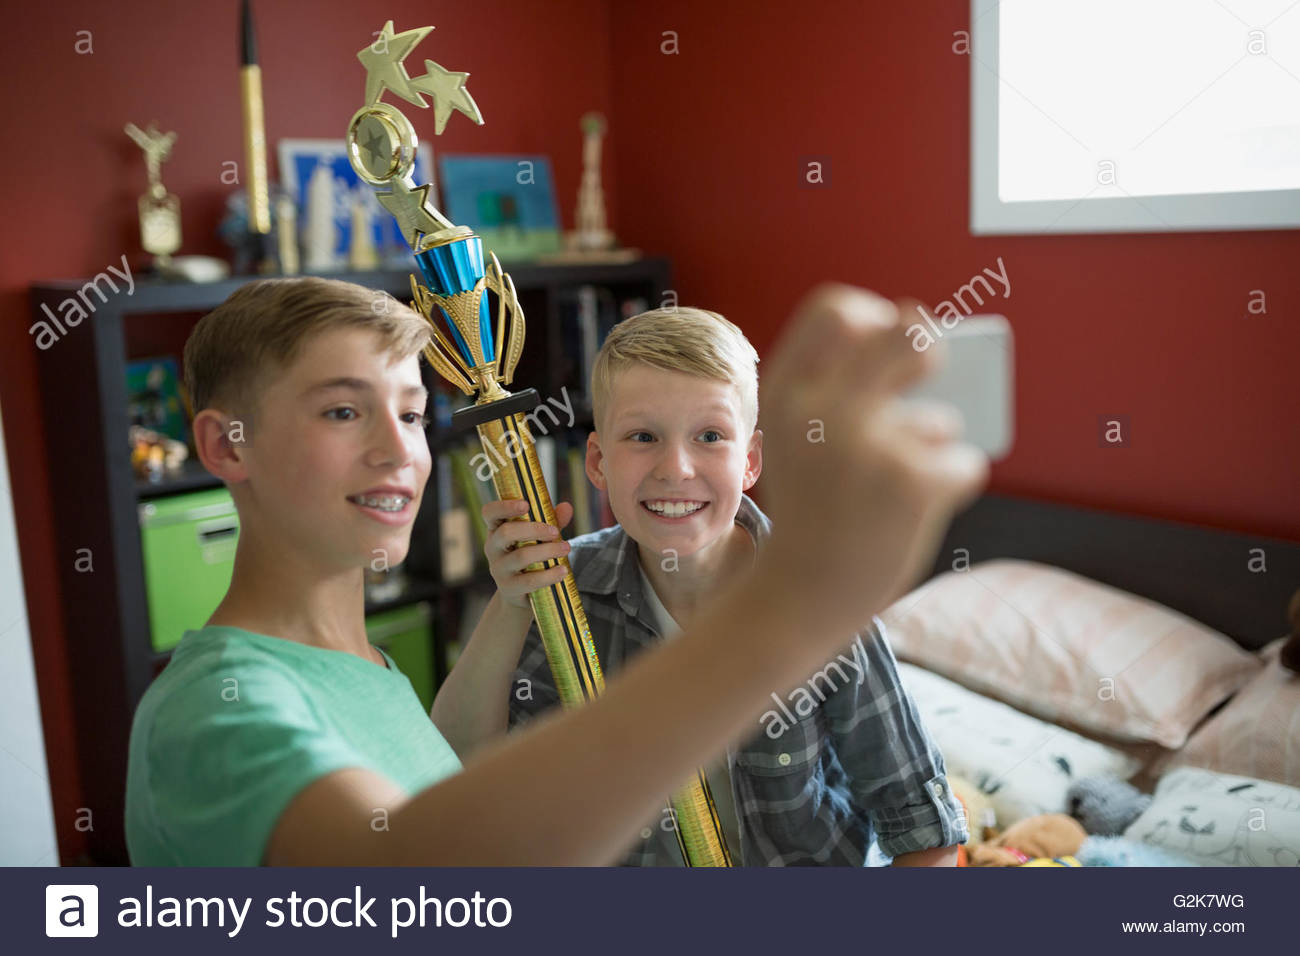 Playful boys with trophy taking selfie in bedroom Stock Photo